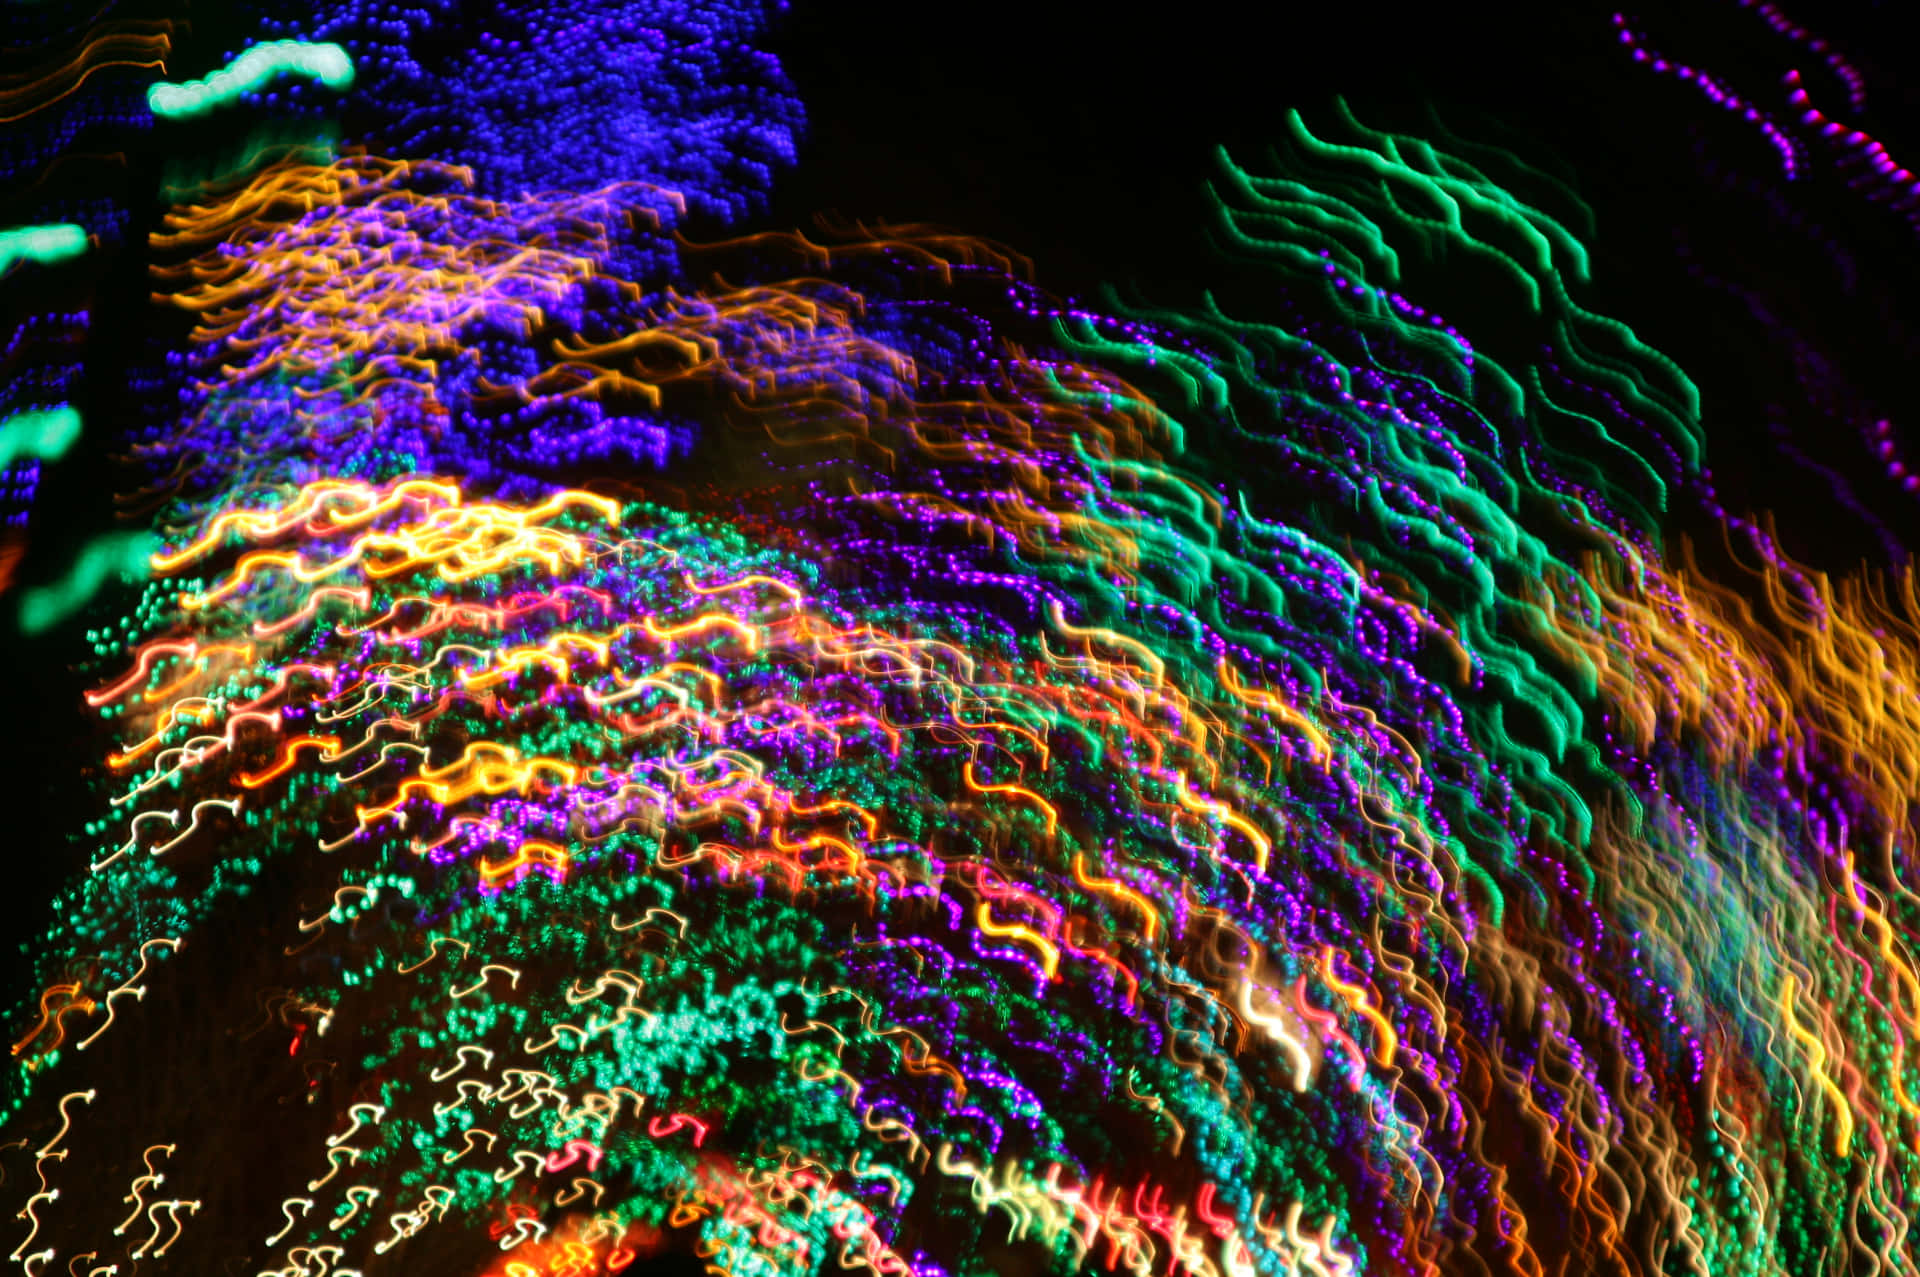 A Blurry Image Of A Colorful Tree